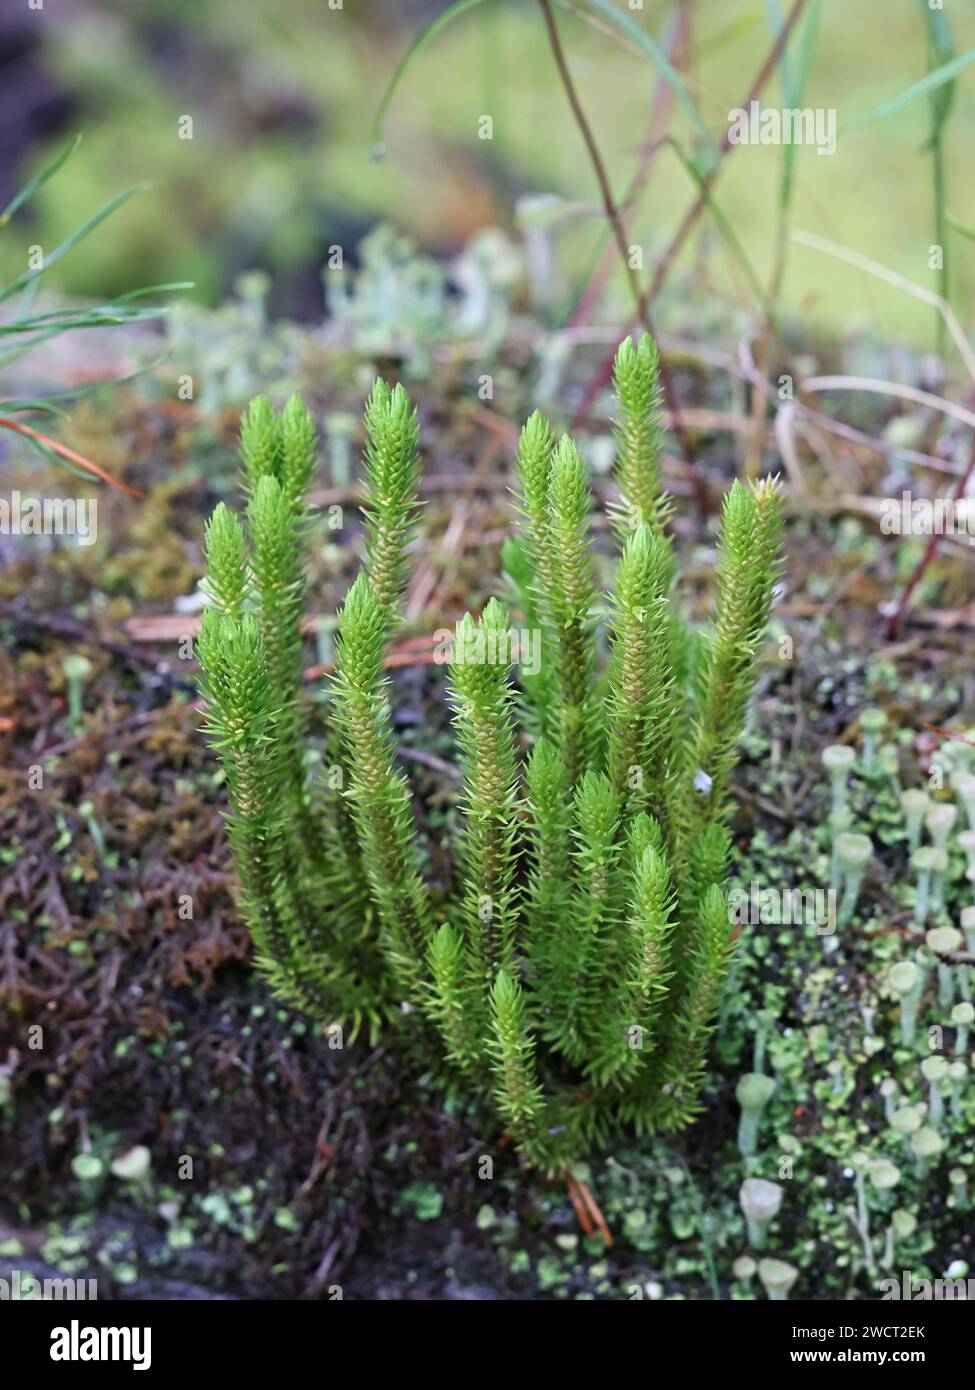 Huperzia selago, commonlöy known as northern firmoss or fir clubmoss, wild plant from Finland Stock Photo